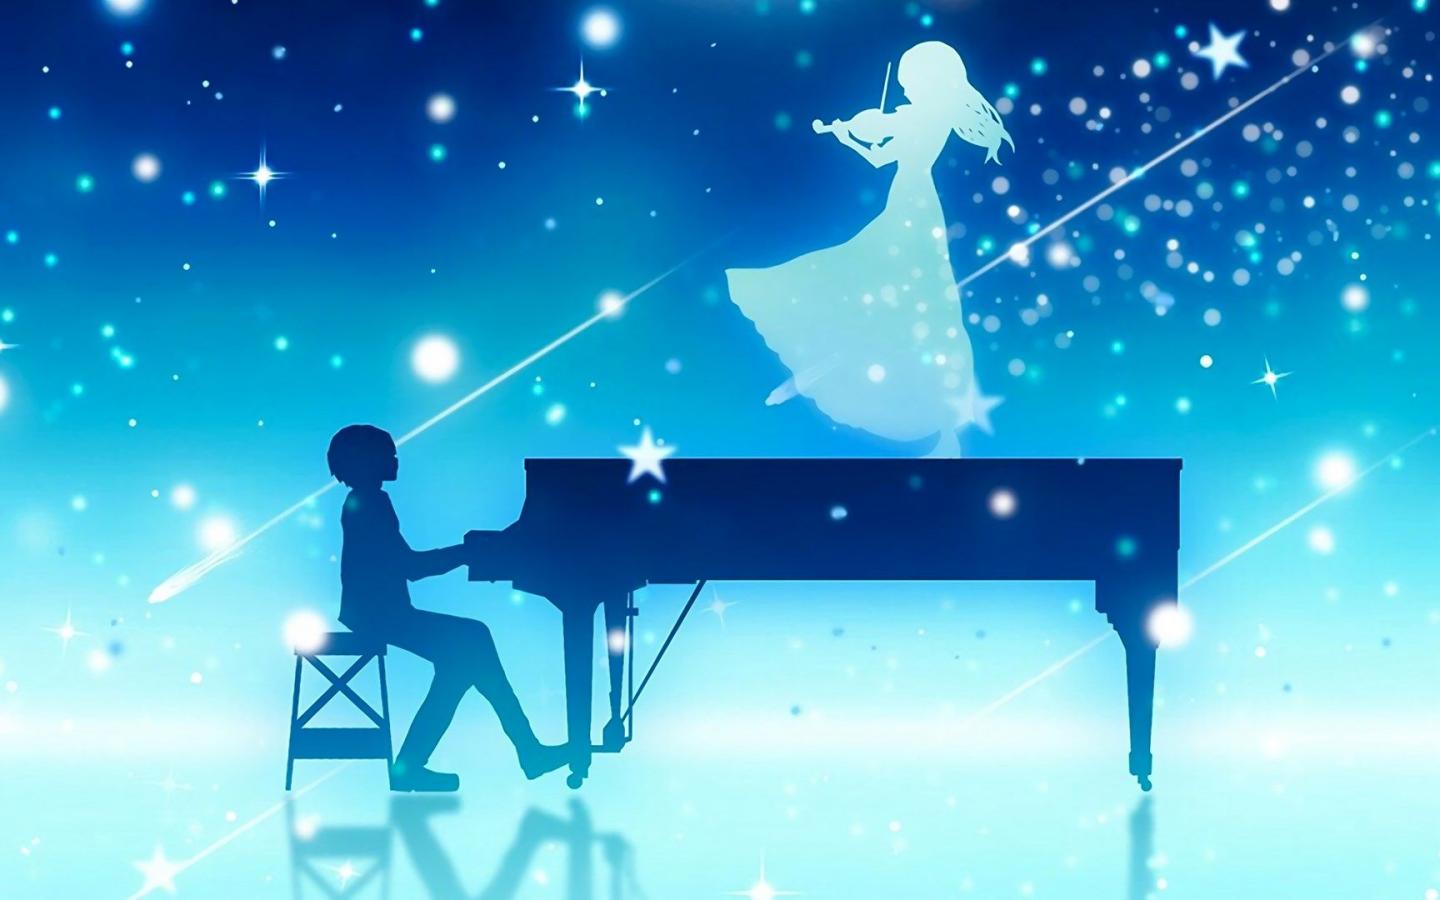 Your Lie In April Wallpaper 1920x1080 Hd , HD Wallpaper & Backgrounds